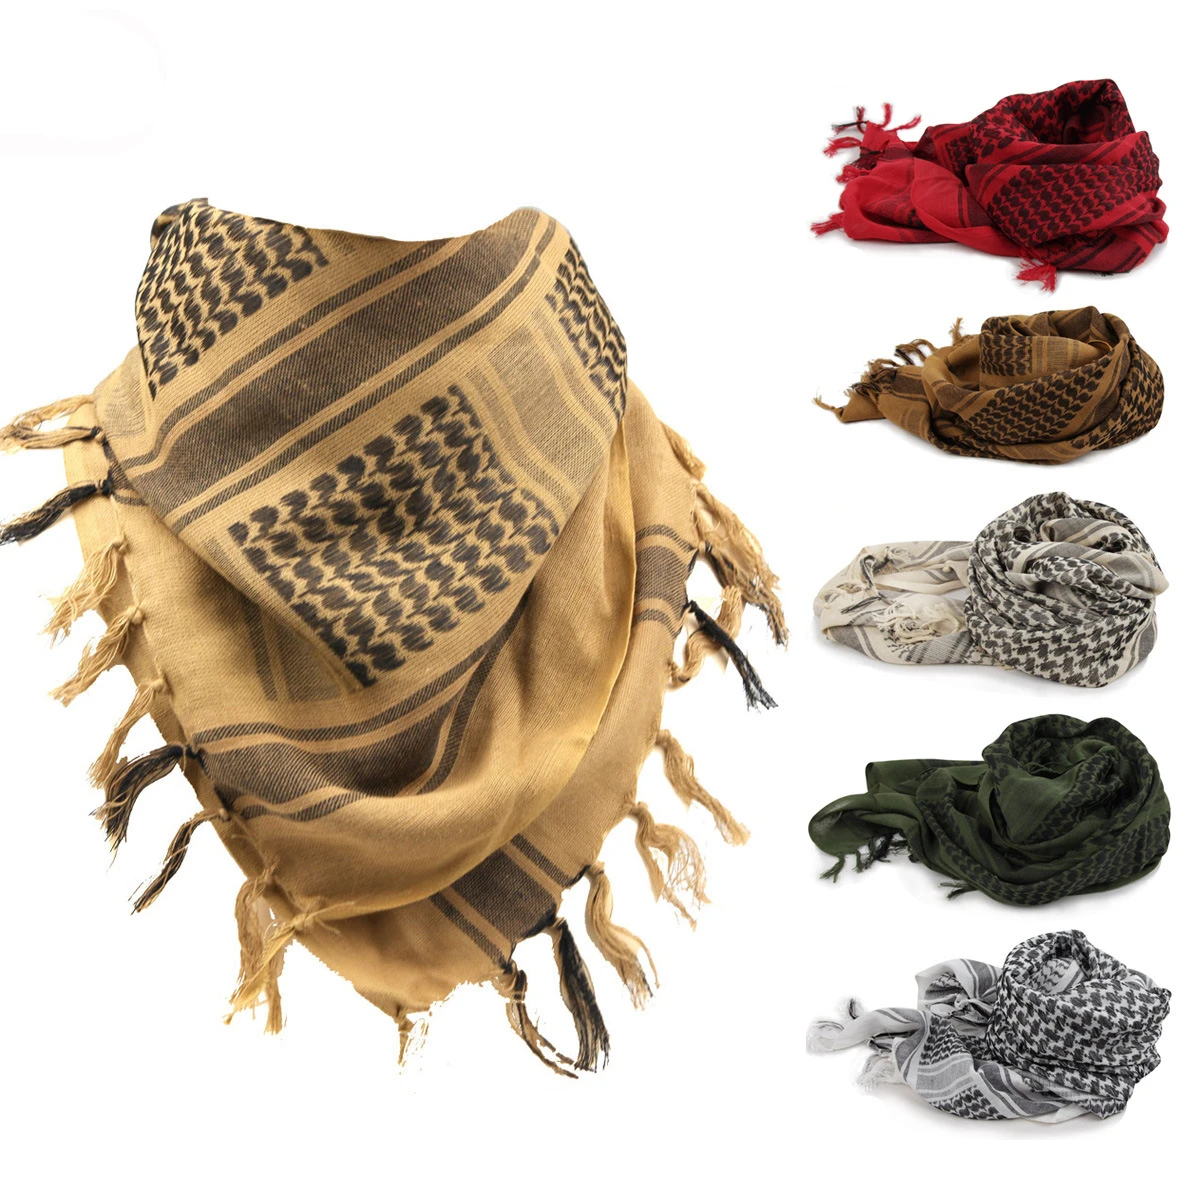 100%Cotton Thicker Arab Scarves Men Winter Military Keffiyeh Windproof Scarf Muslim Hijab Shemagh Tactical Desert Square Wargame